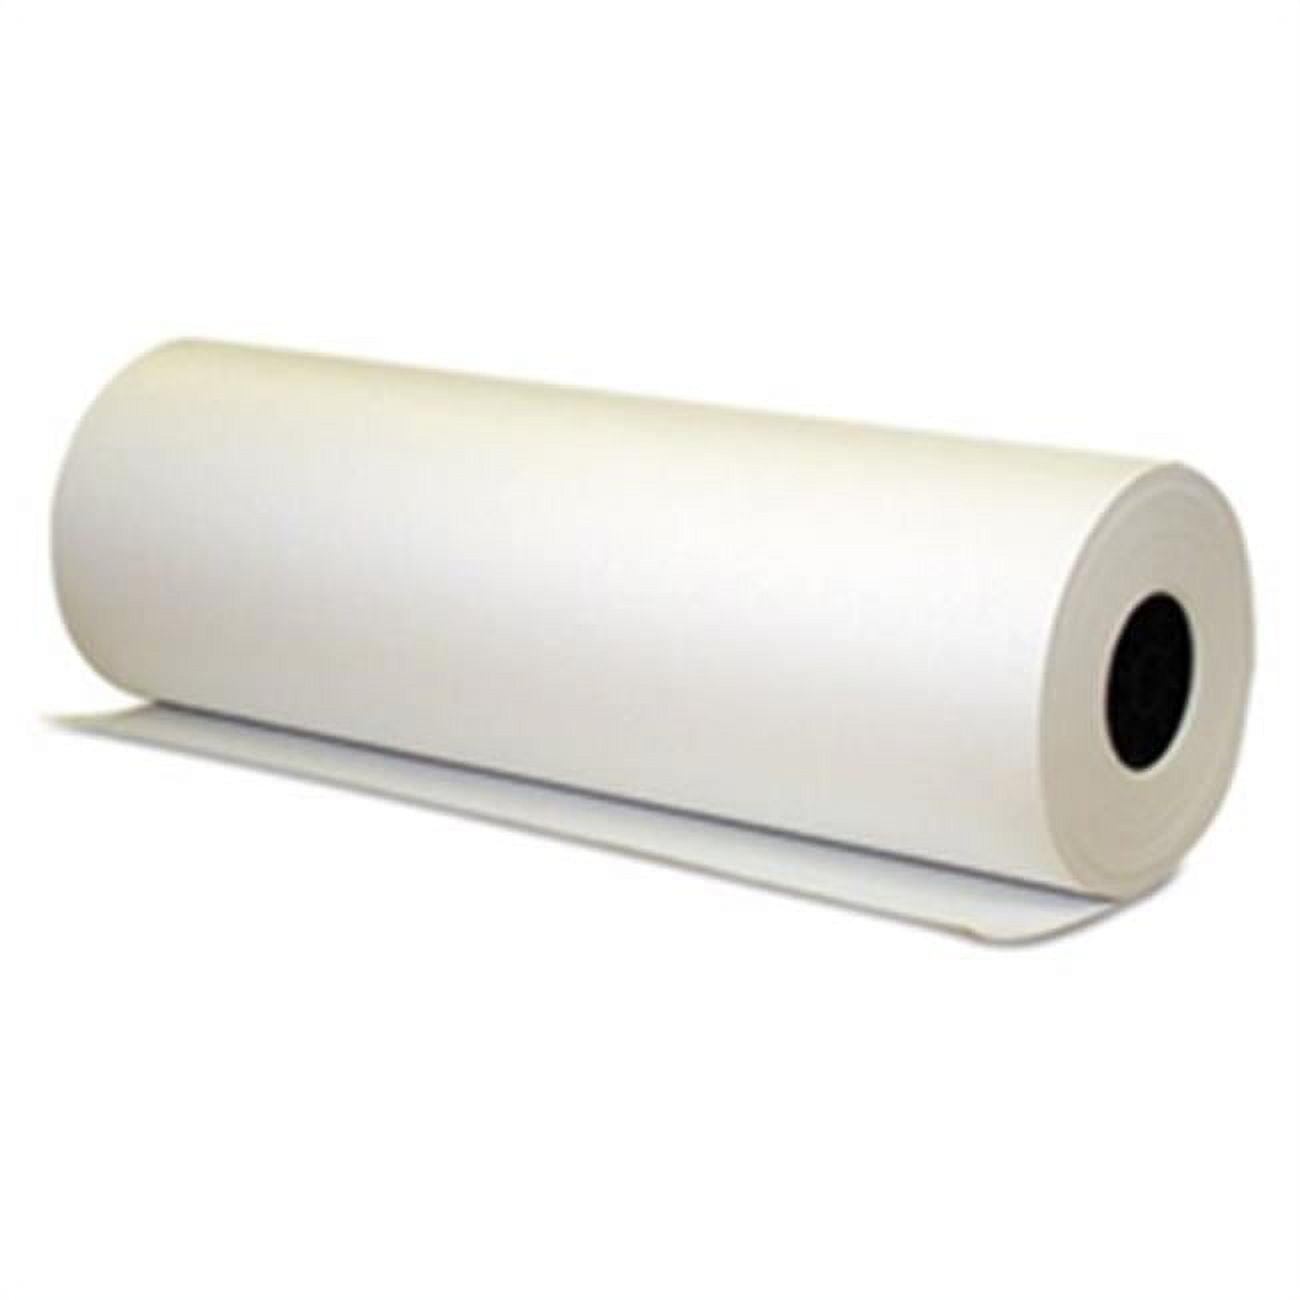 Wb24720 24 In. X 720 Ft. Butcher Paper, White